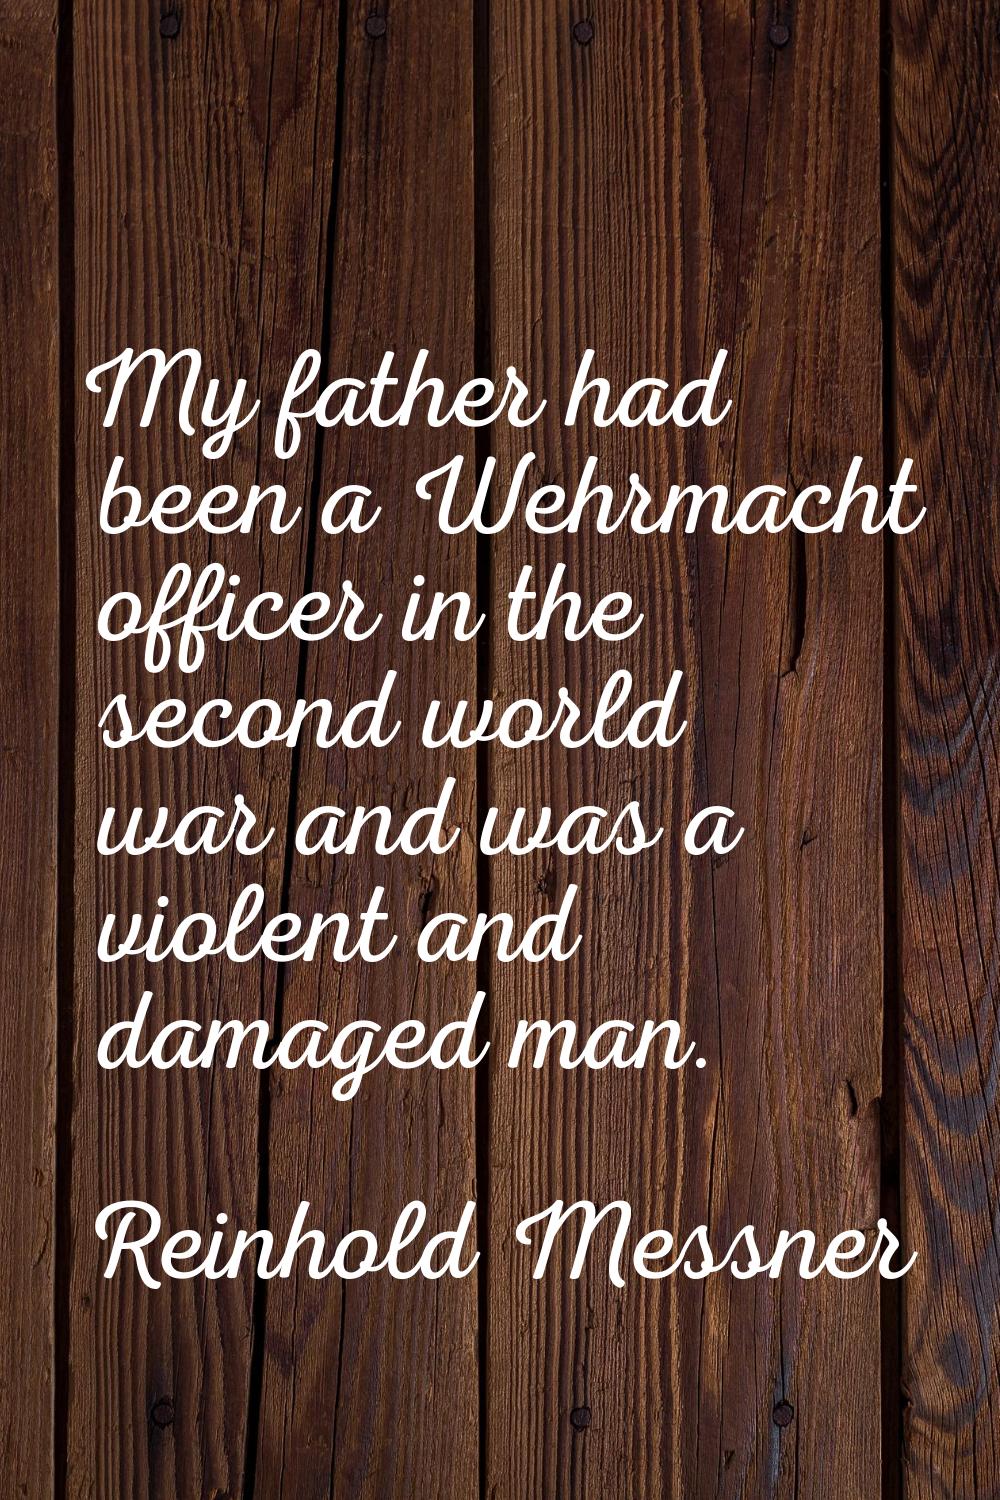 My father had been a Wehrmacht officer in the second world war and was a violent and damaged man.